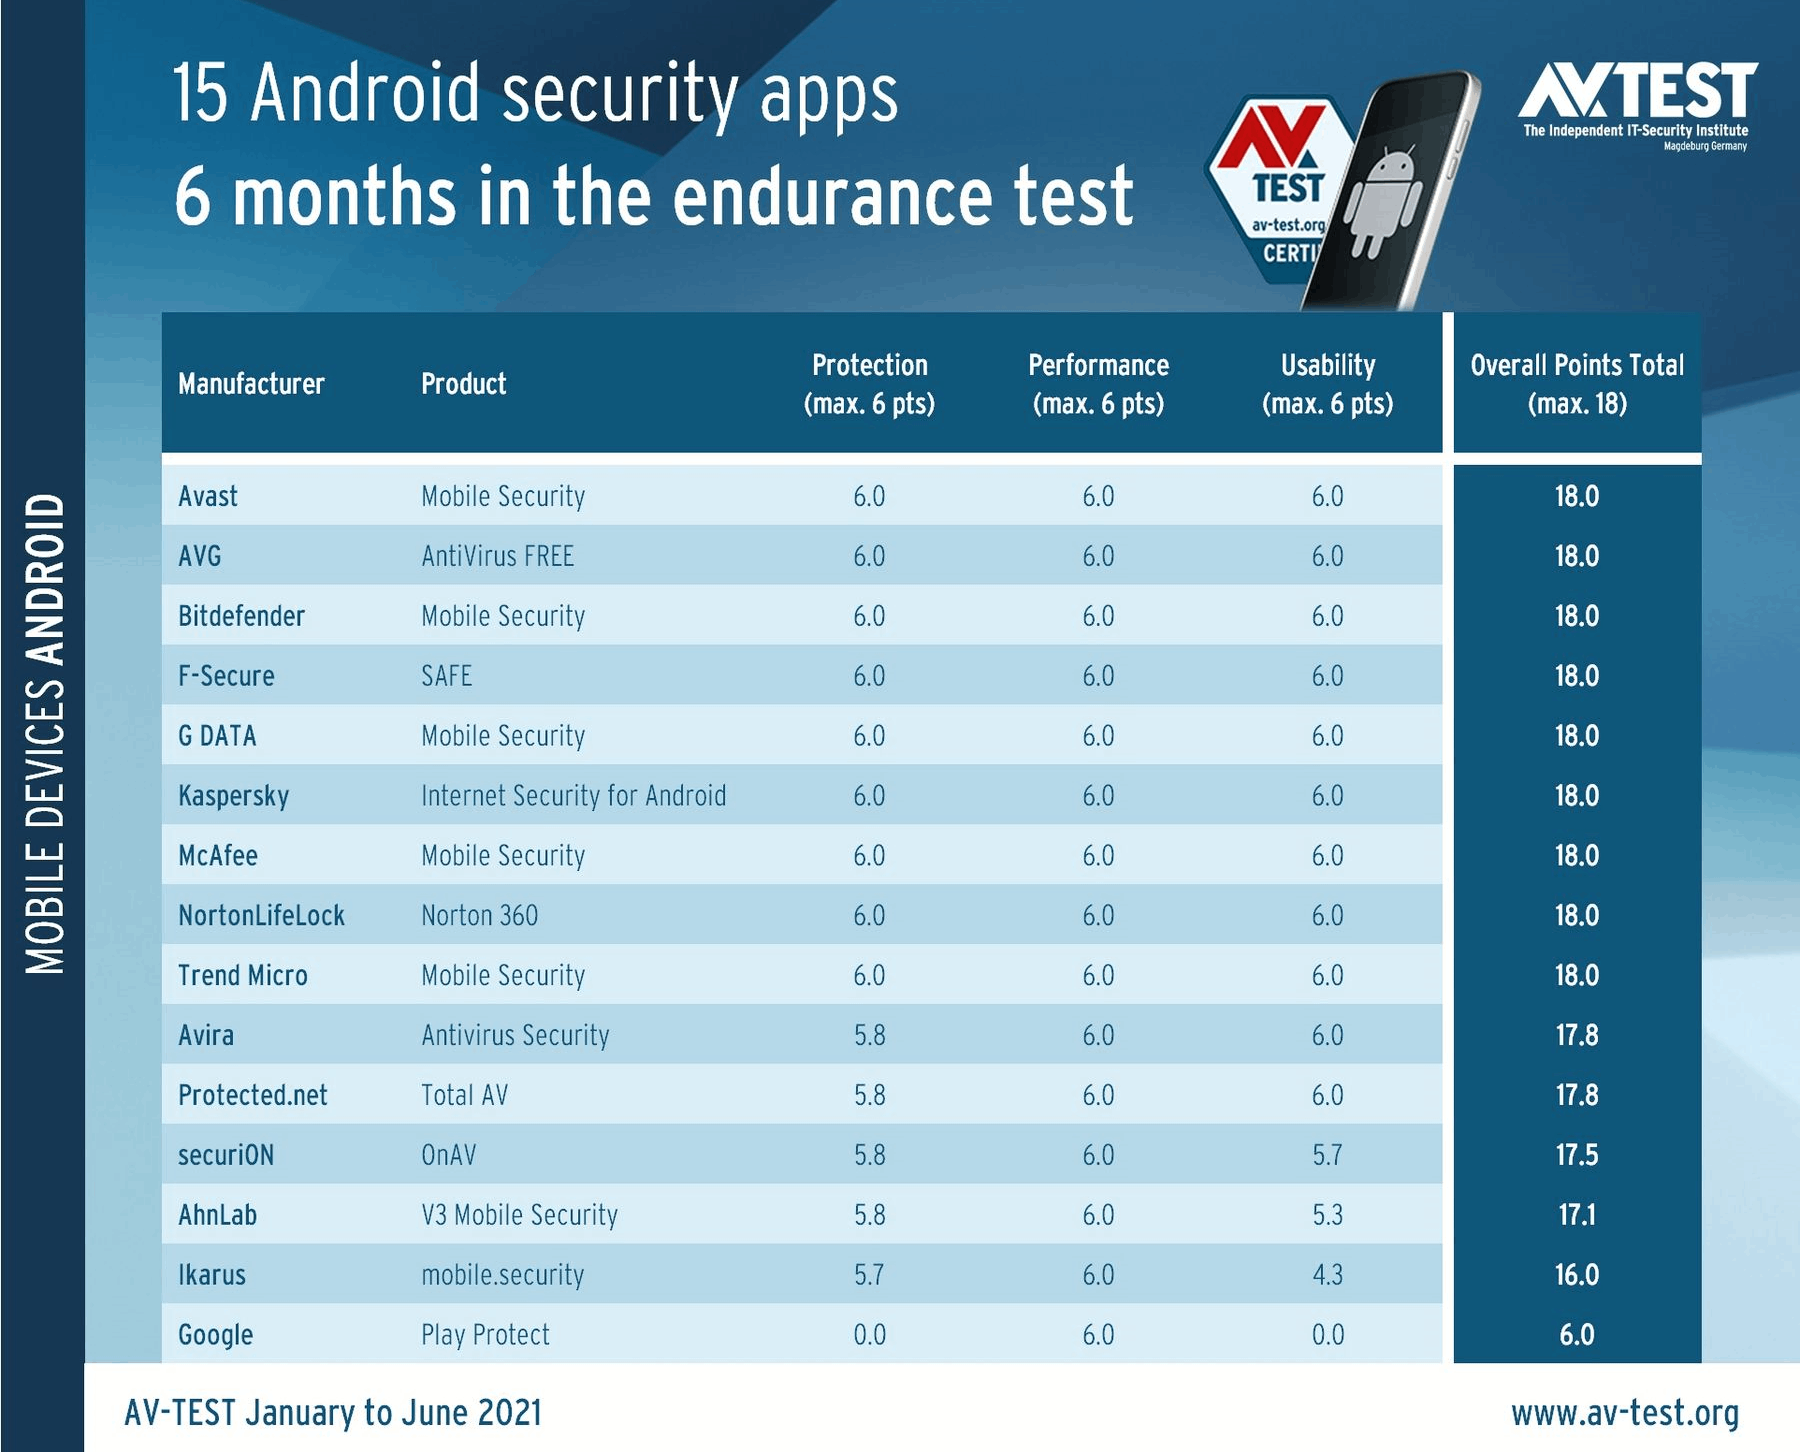 15-security-apps-for-android-in-an-endurance-test